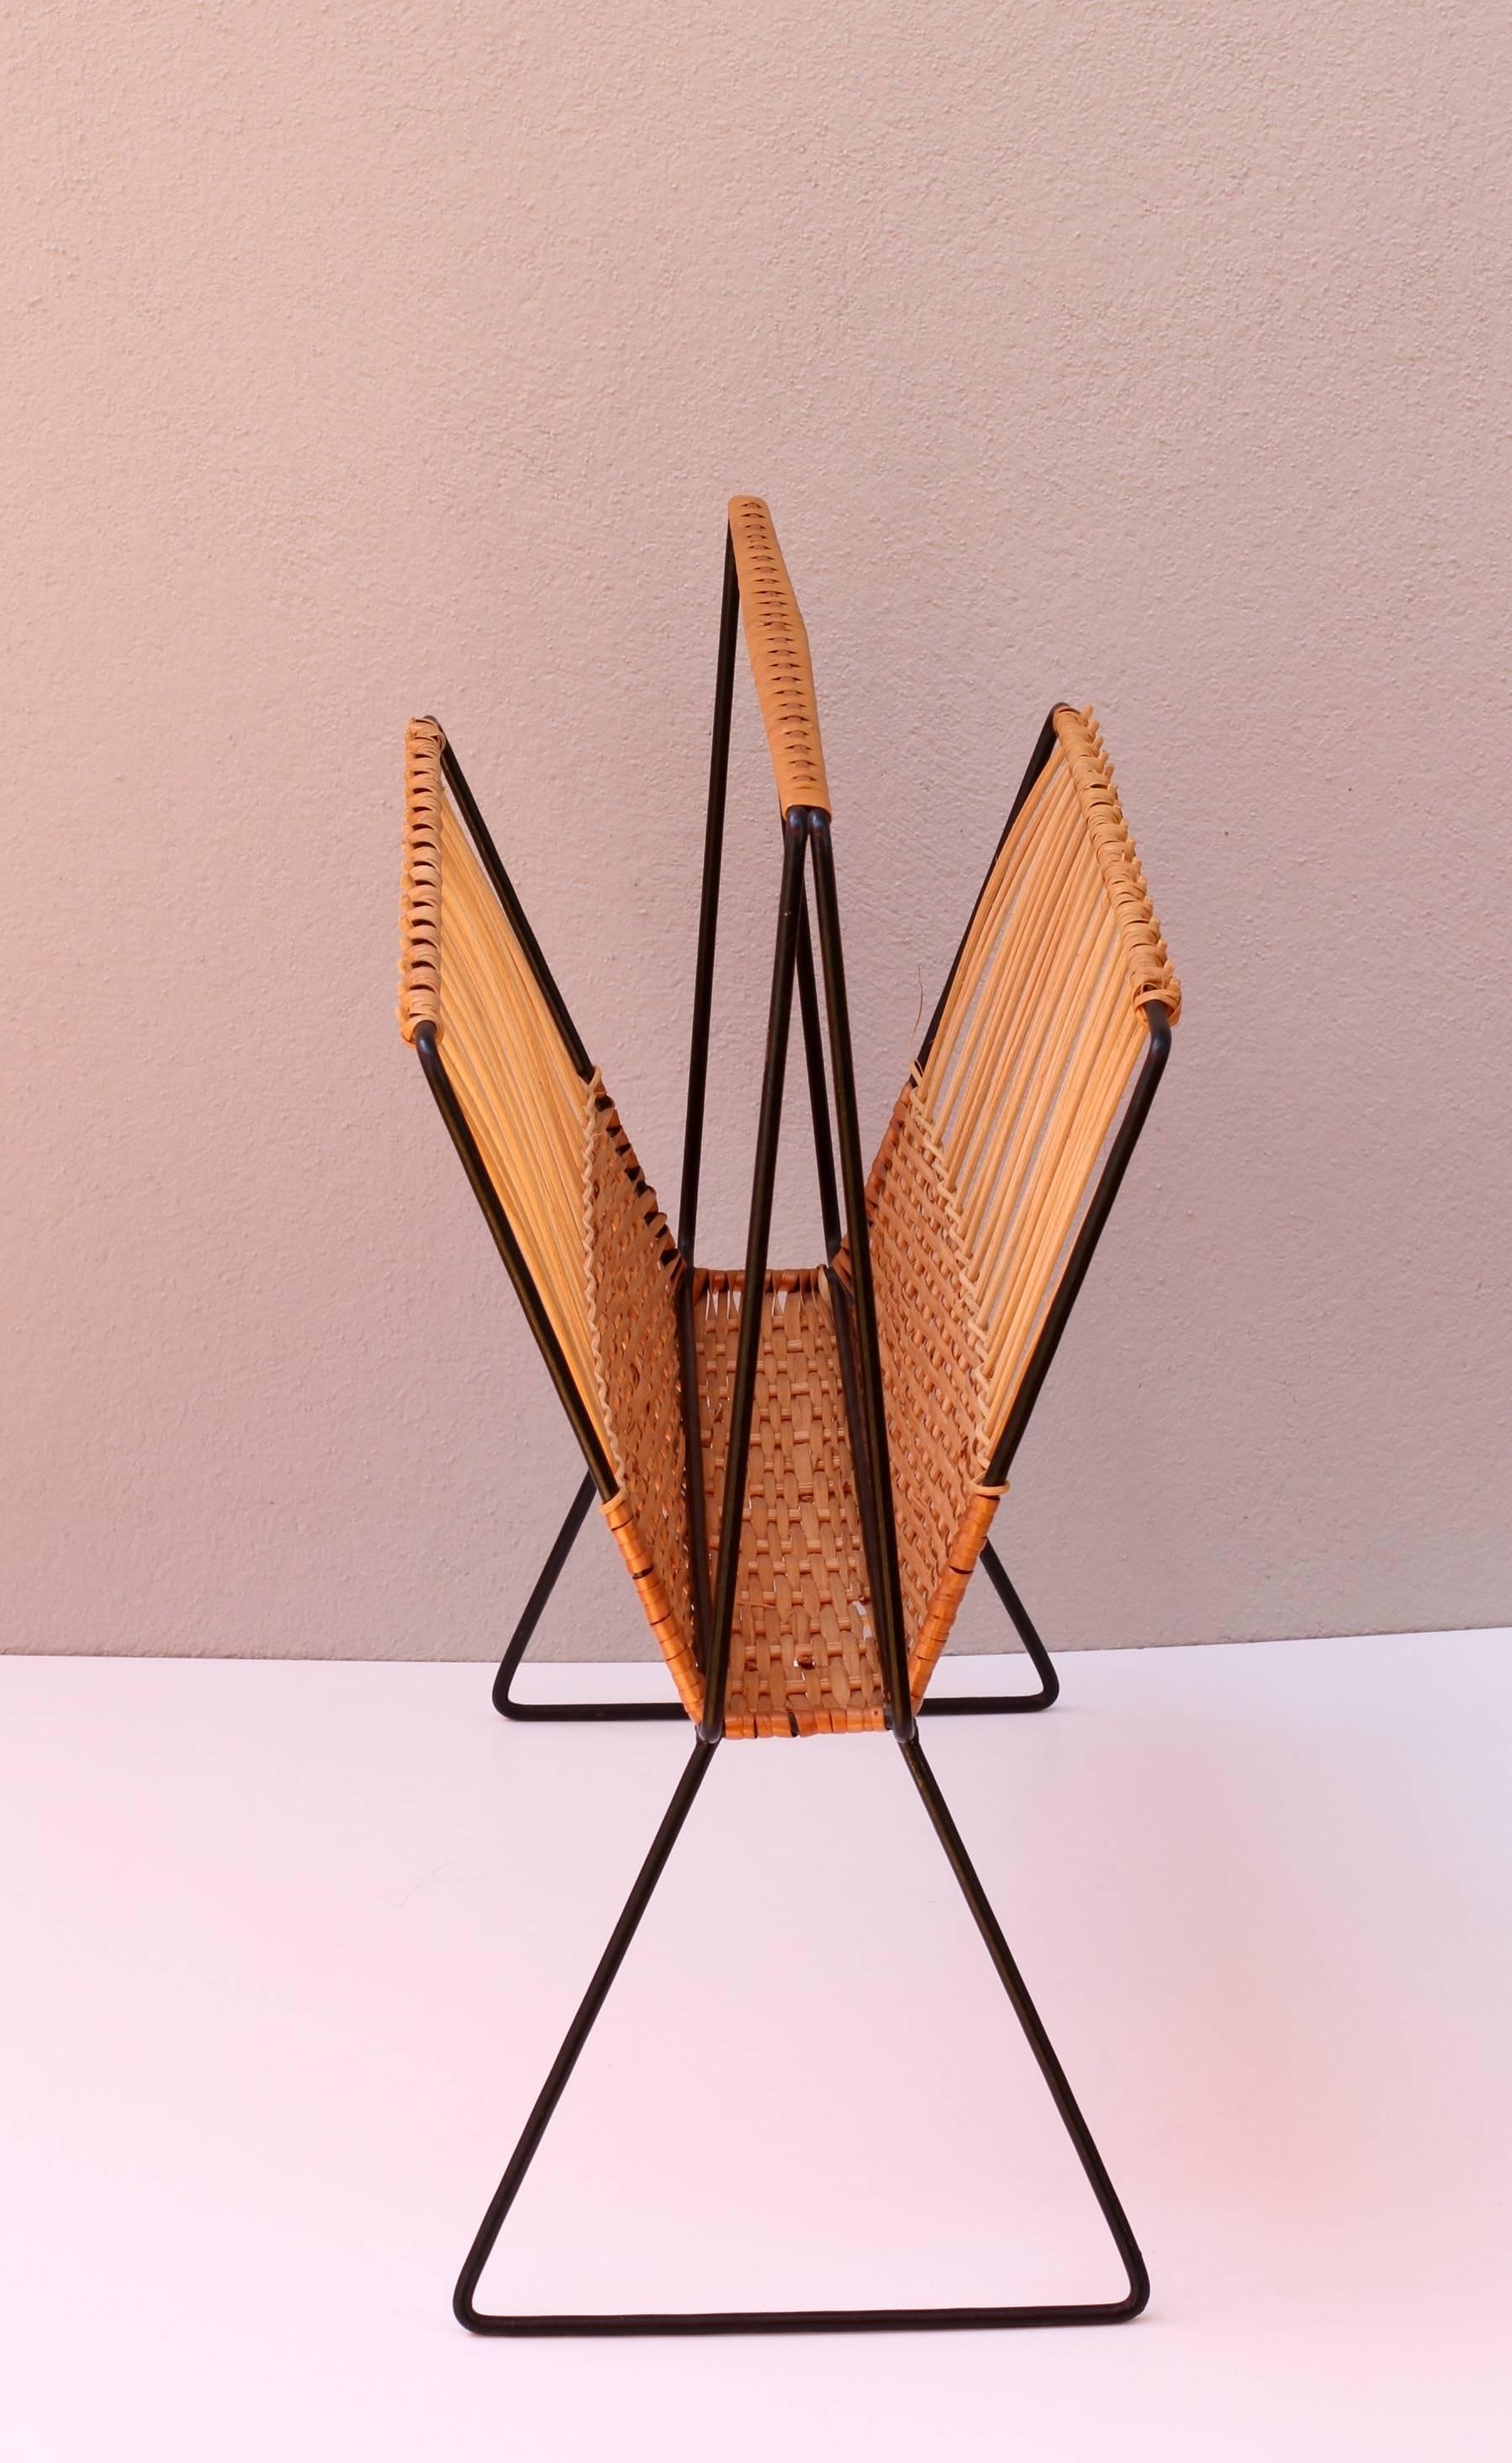 Painted Mid-Century Modernist Wicker Magazine Rack Stand in the Style of Rohe Noordwolde